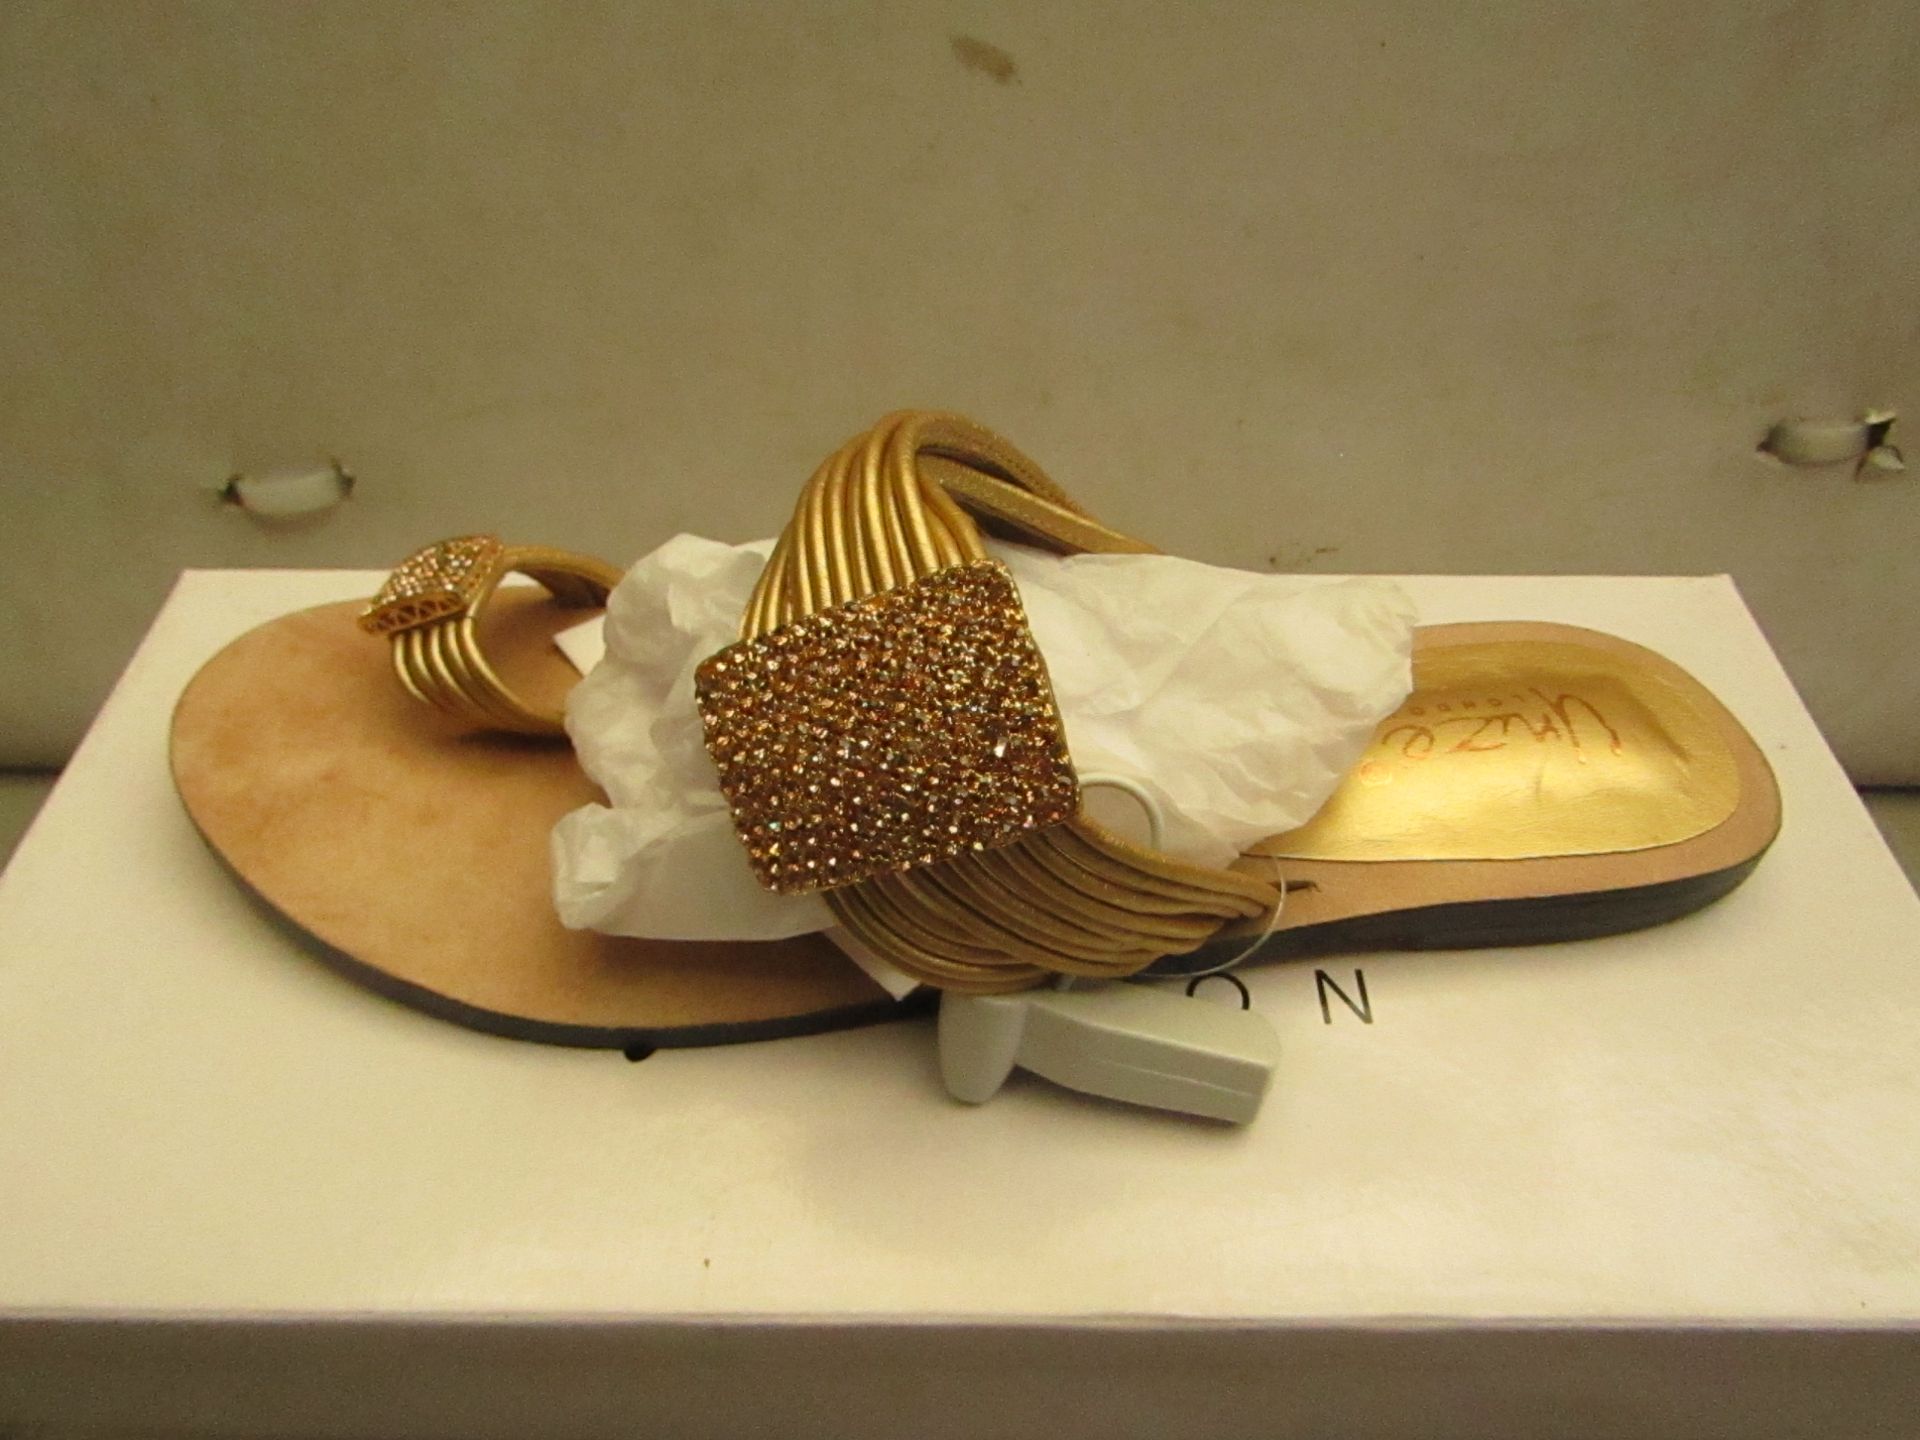 Uaze by Shalamar glod and diamante sandal size 8 new & boxed see image for design